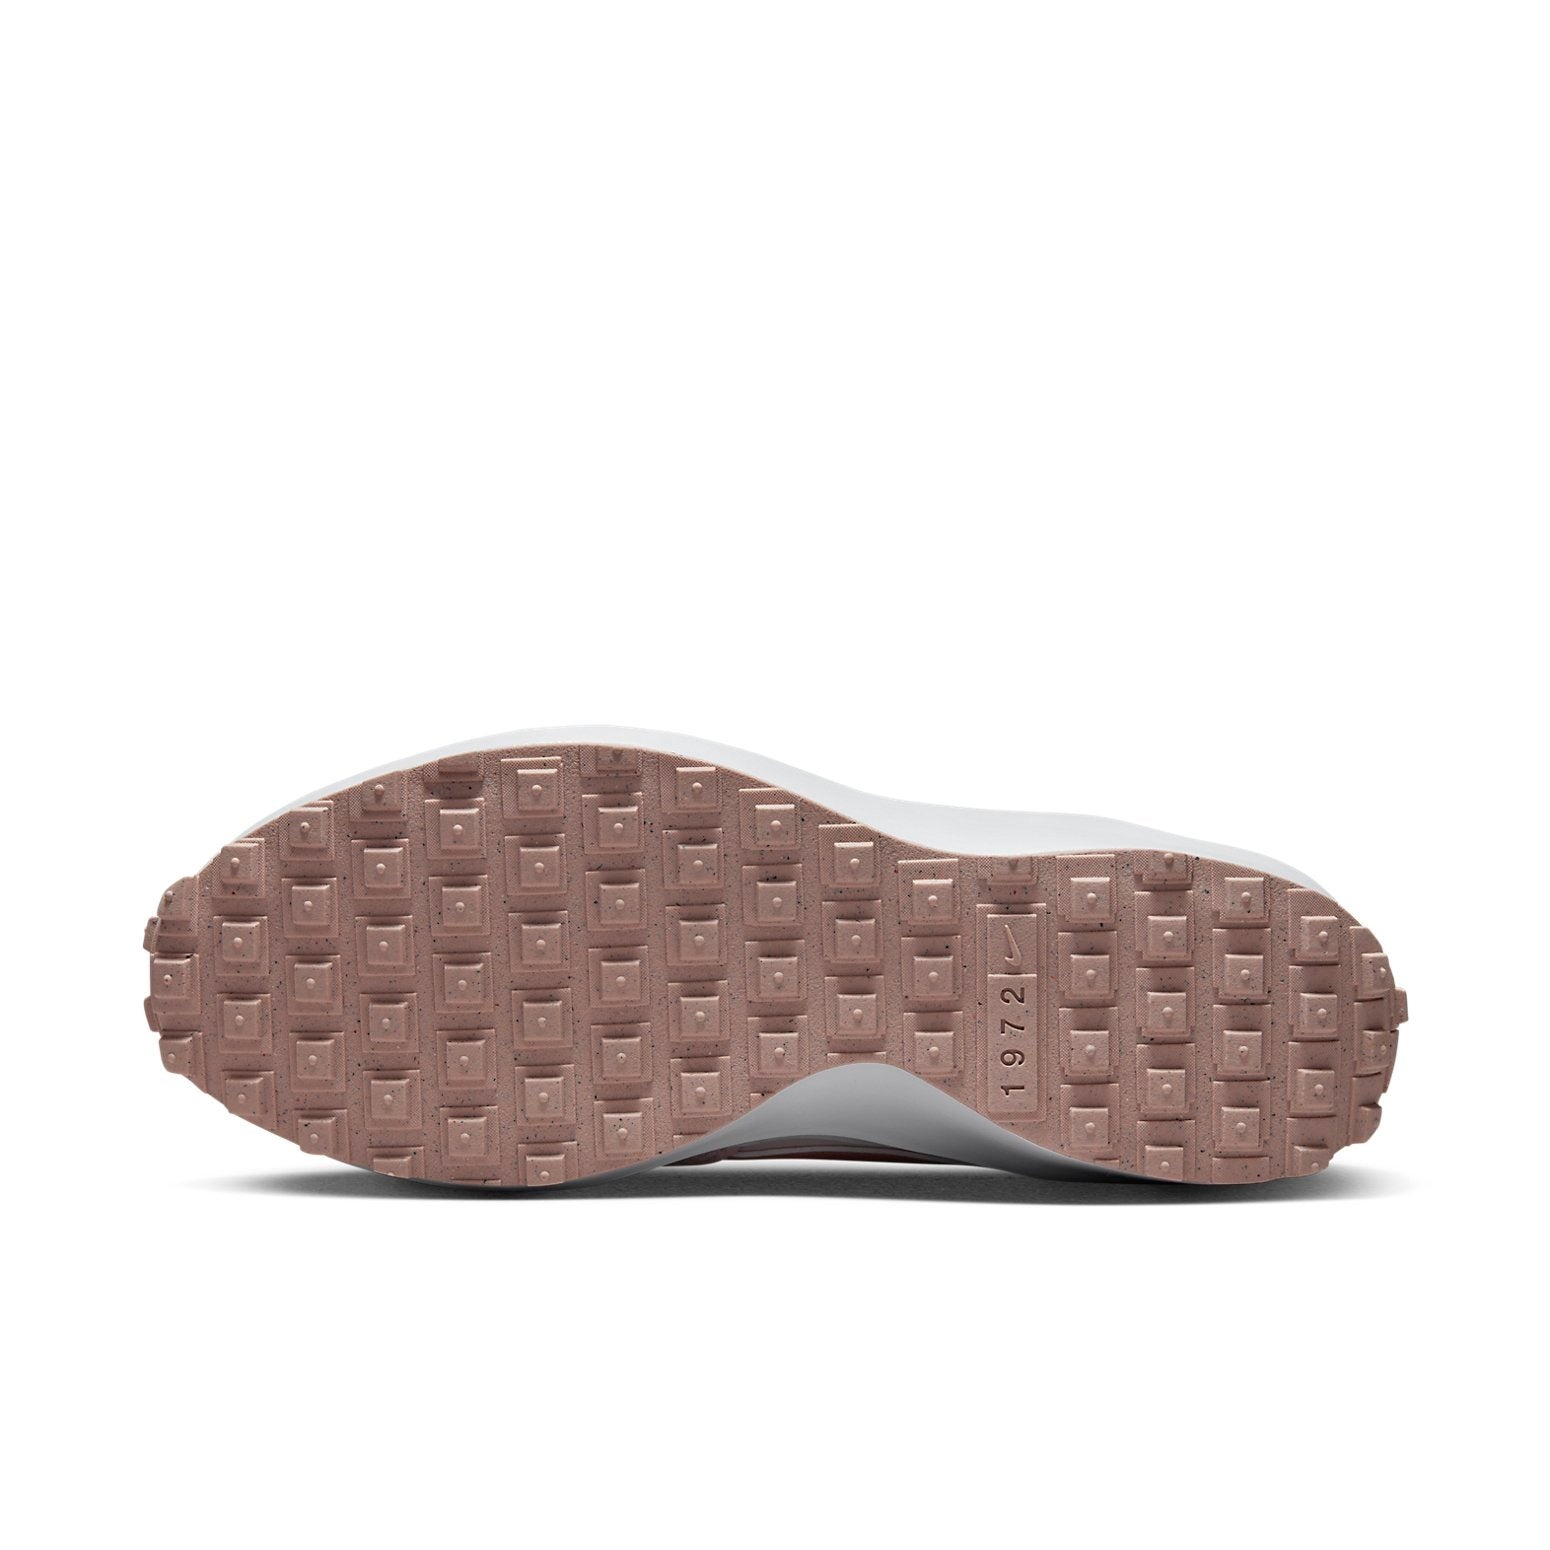 (WMNS) Nike Waffle Debut 'Light Soft Pink' DH9523-602 - 6